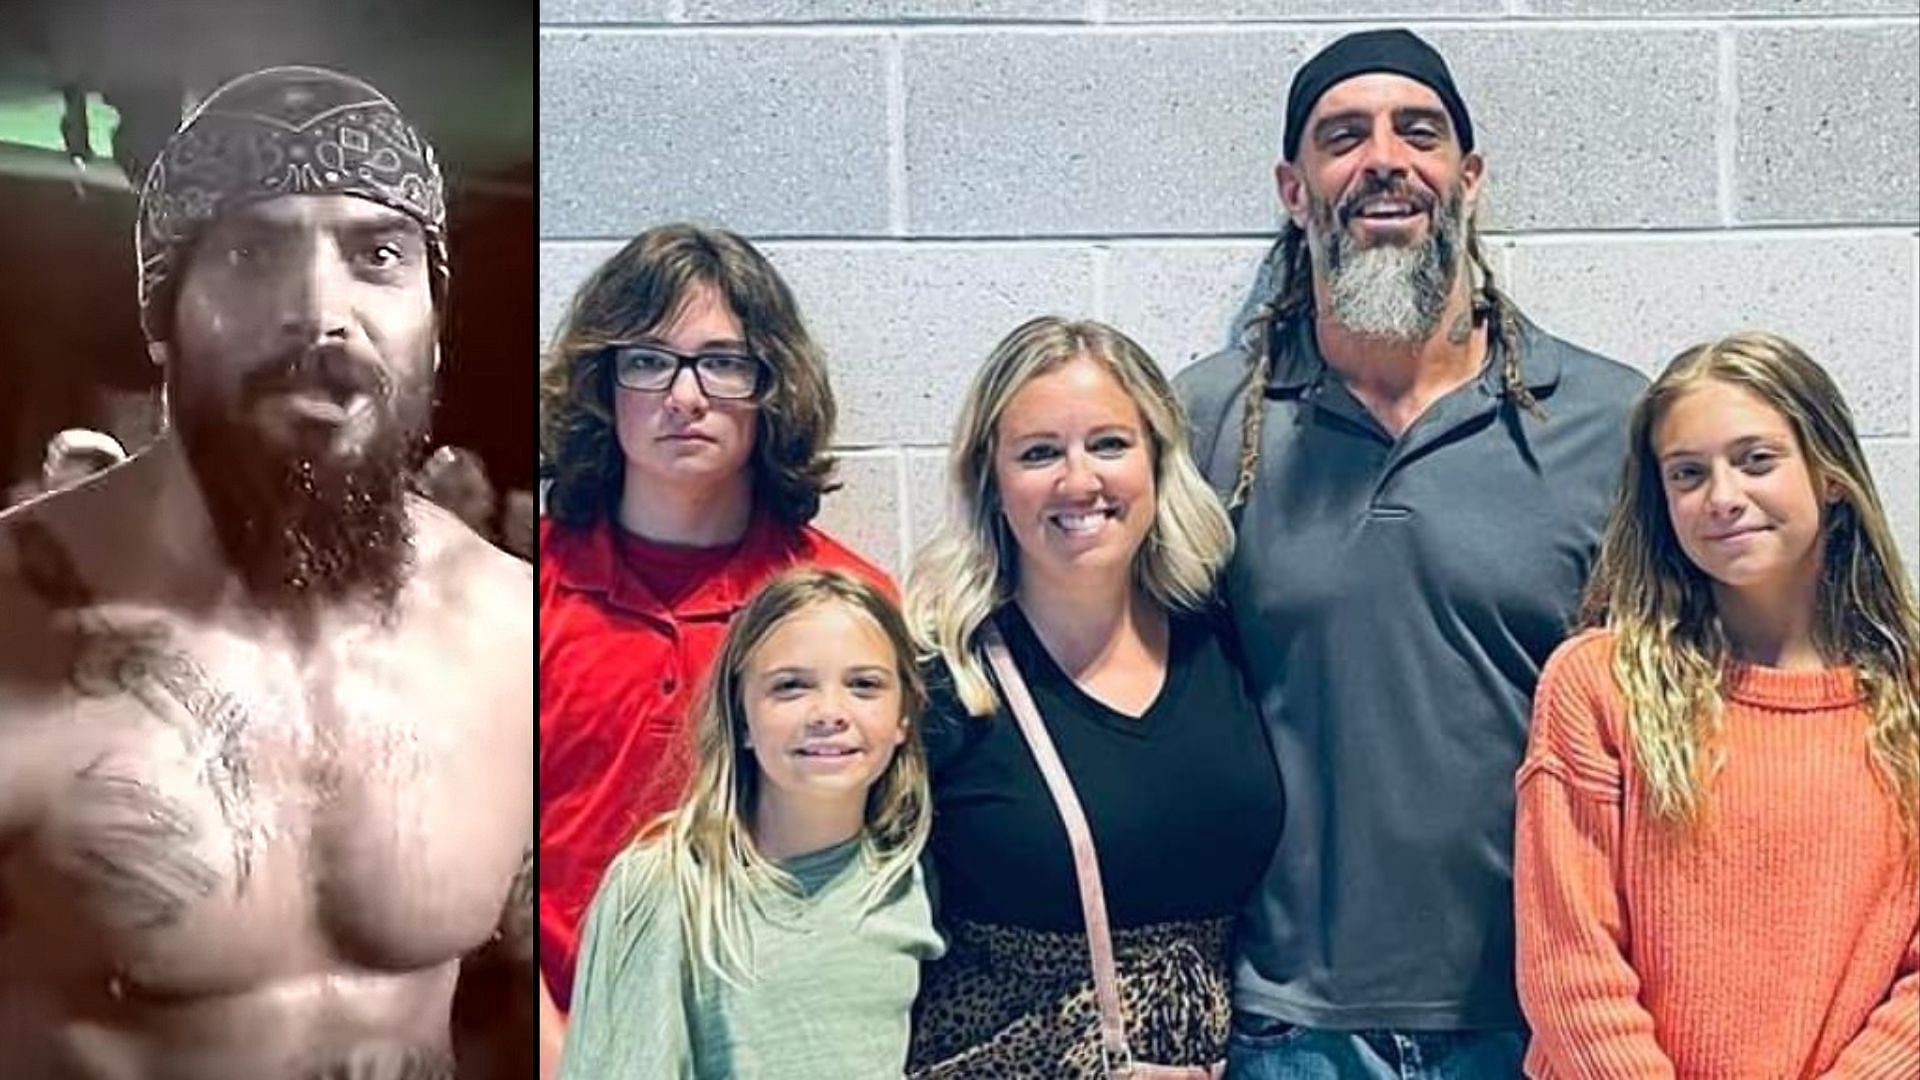 Jay Briscoe passed at the age of 38 and is survived by his wife Ashley and three daughters